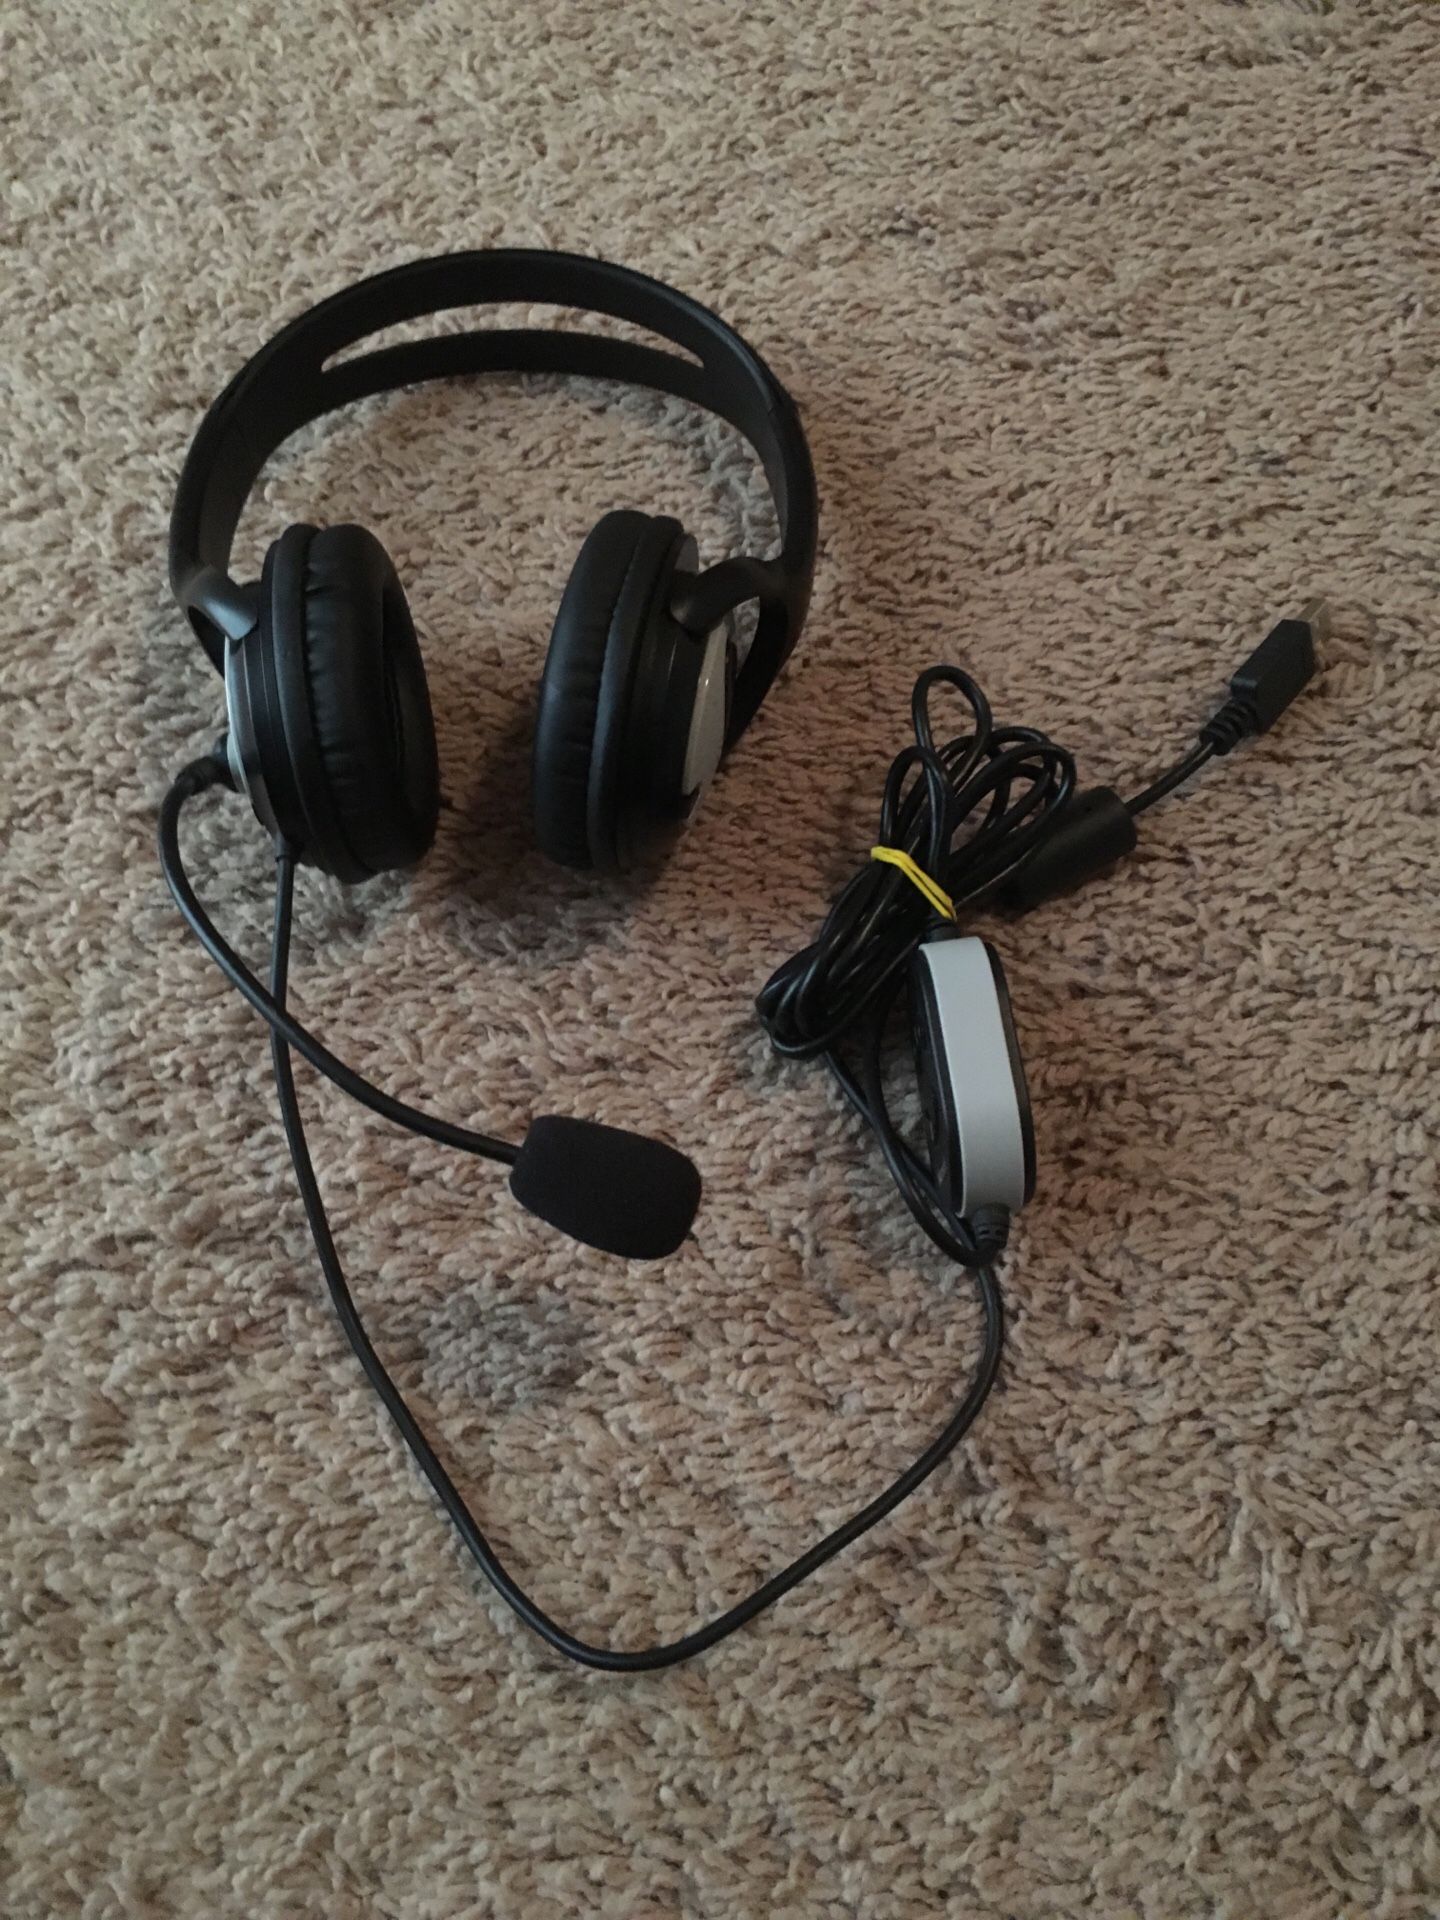 Brand new gaming headphones with microphone